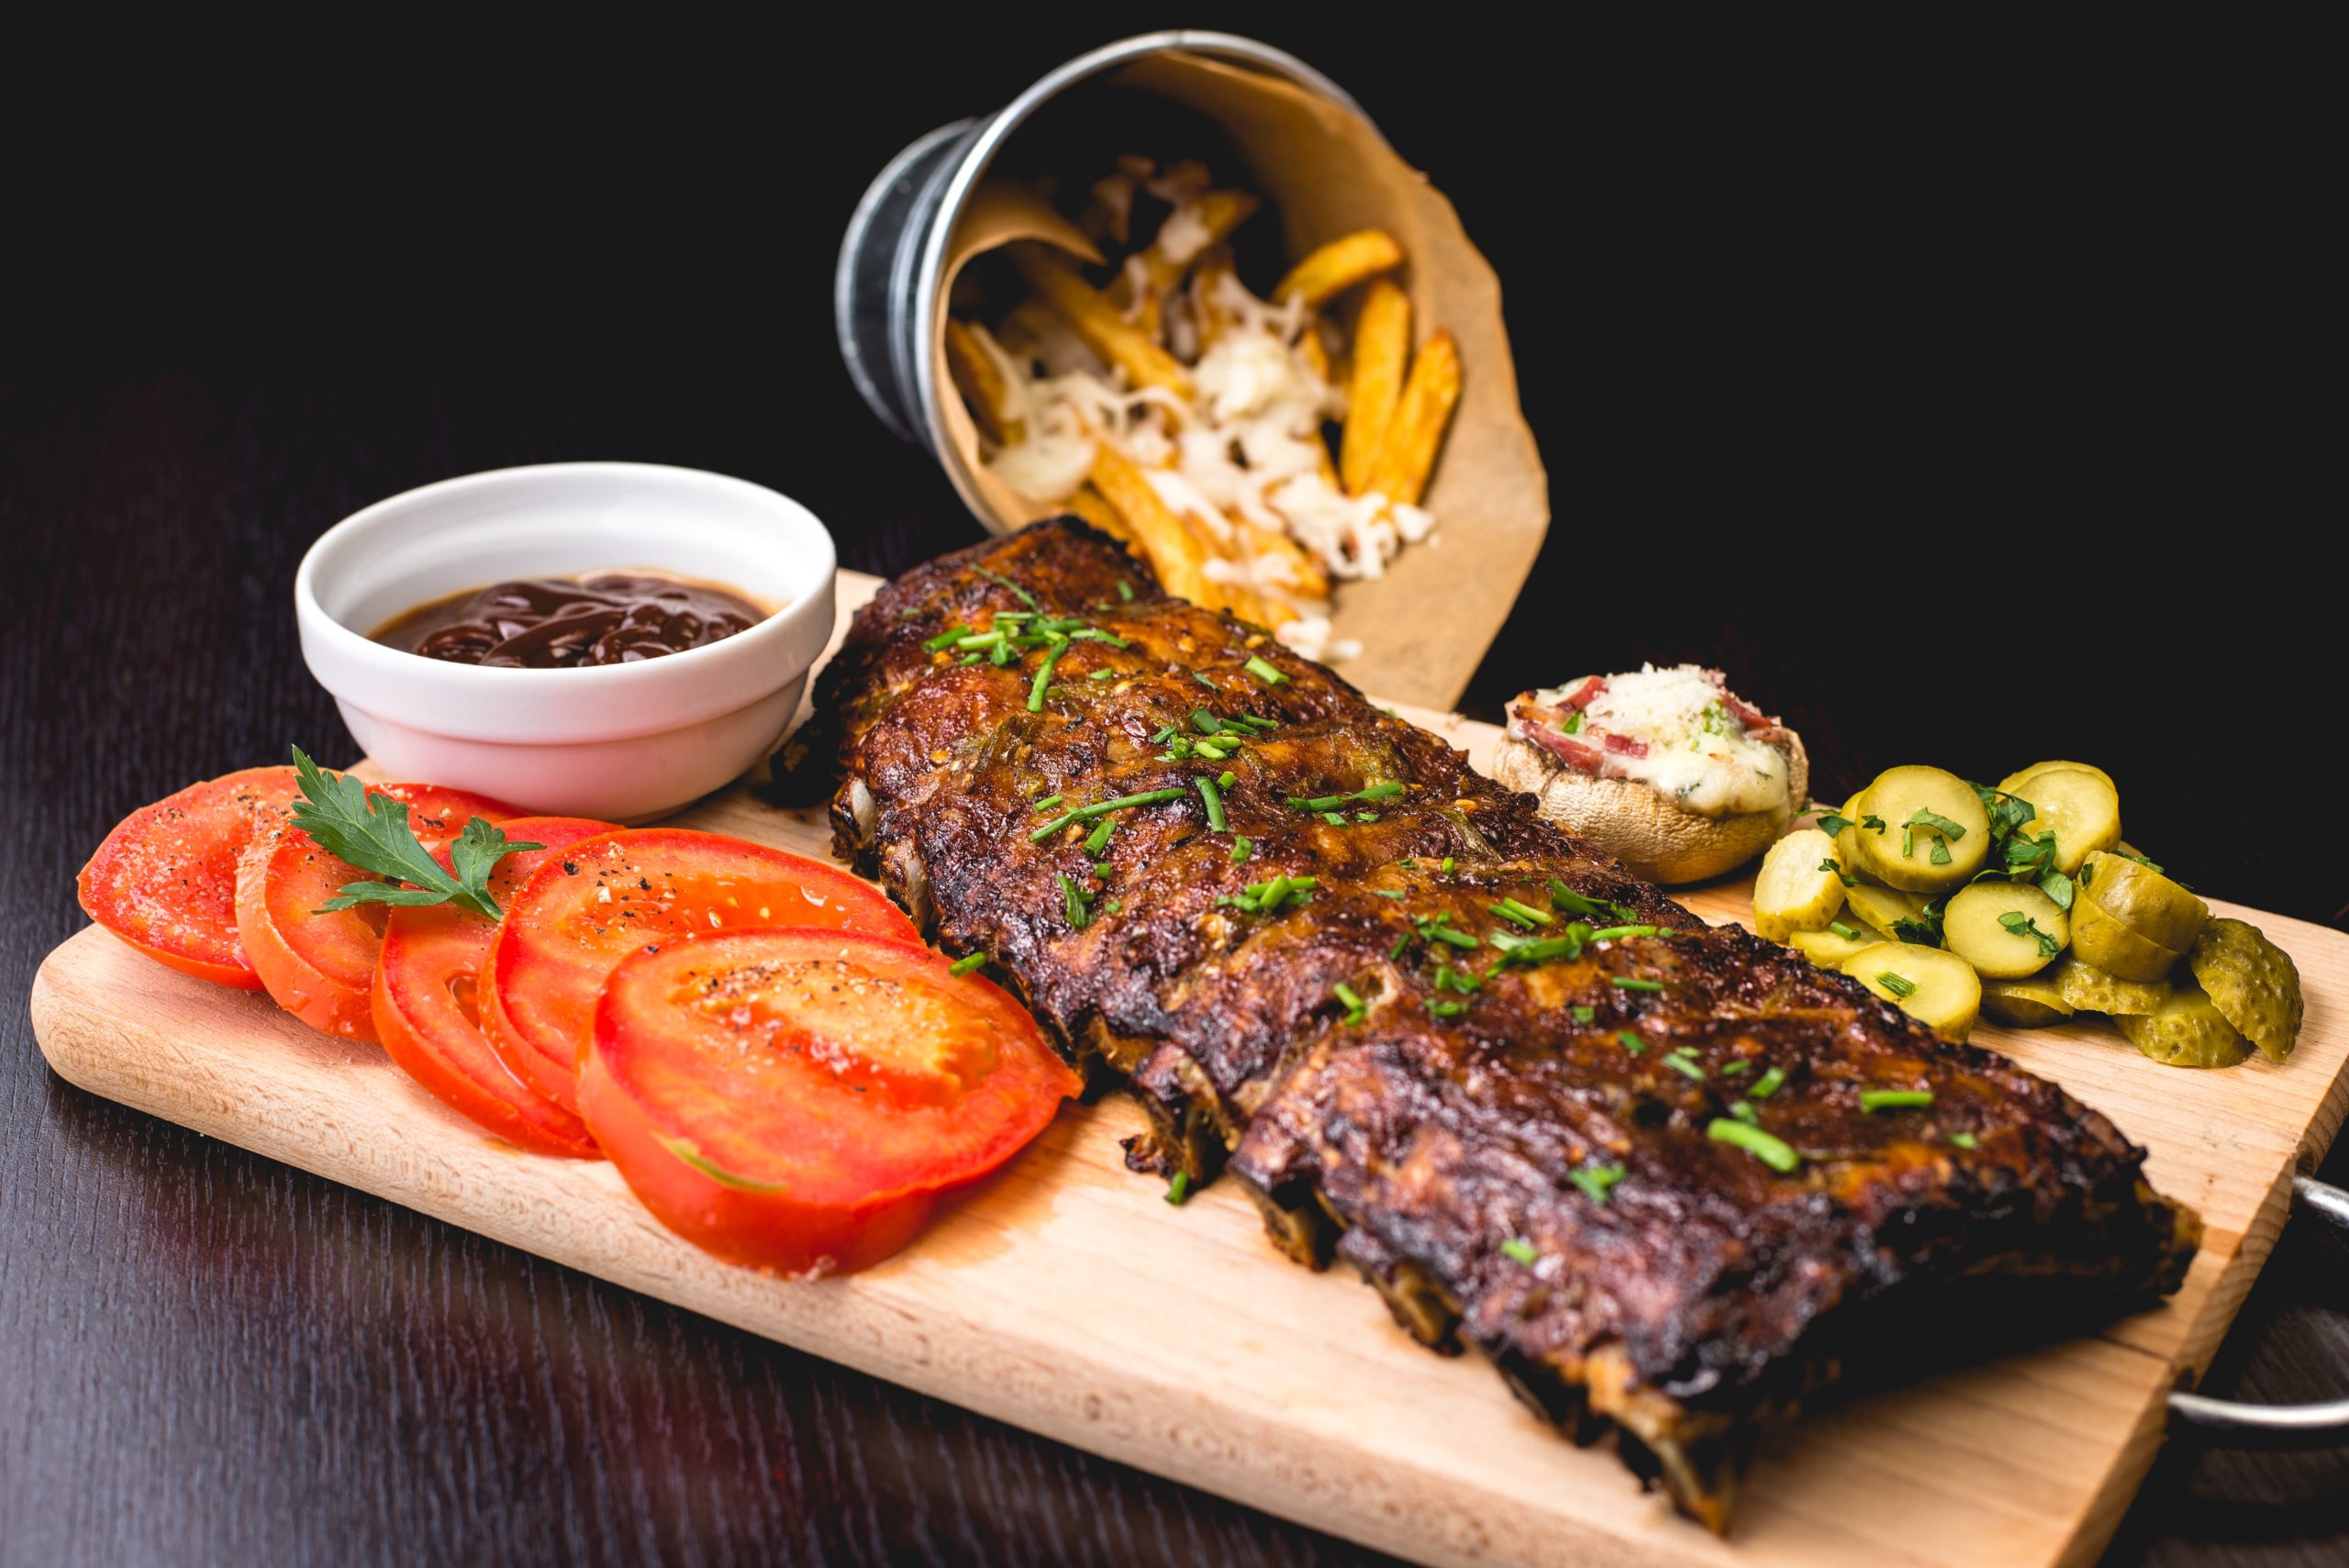 End Your Search for "BBQ Ribs Delivery Near Me" With CowgirlQ